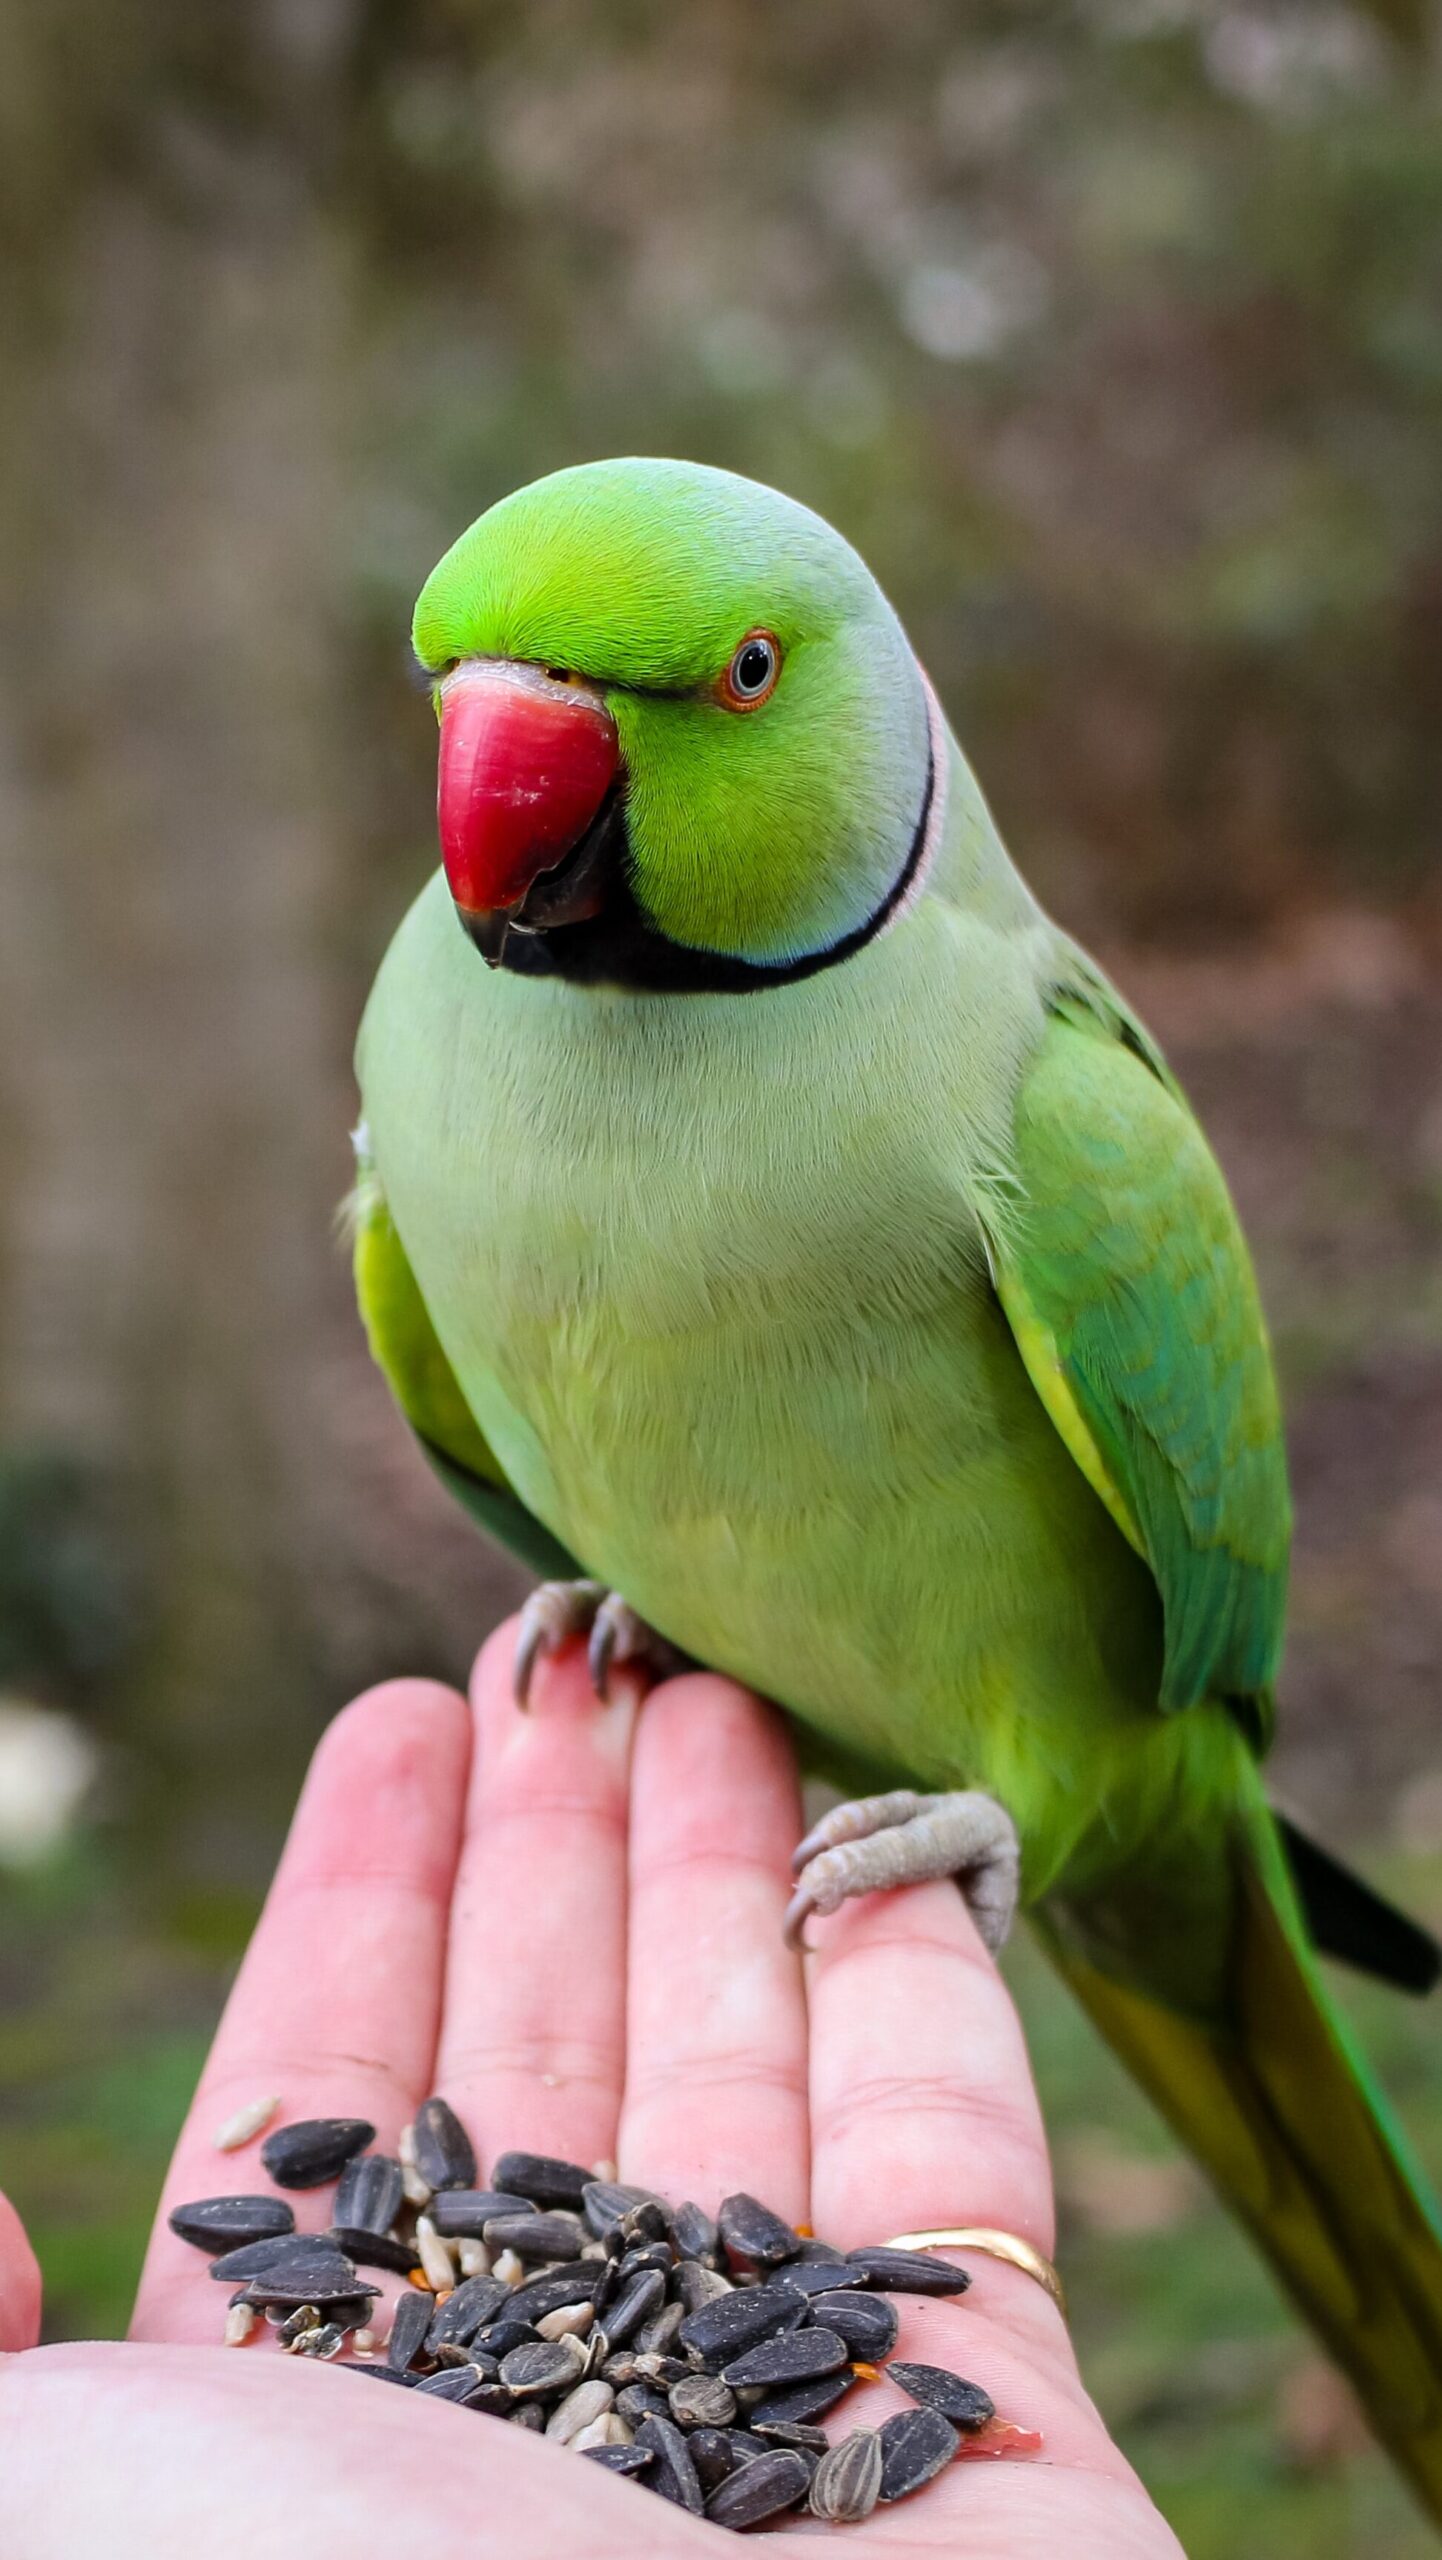 Green parrot on hand with seed